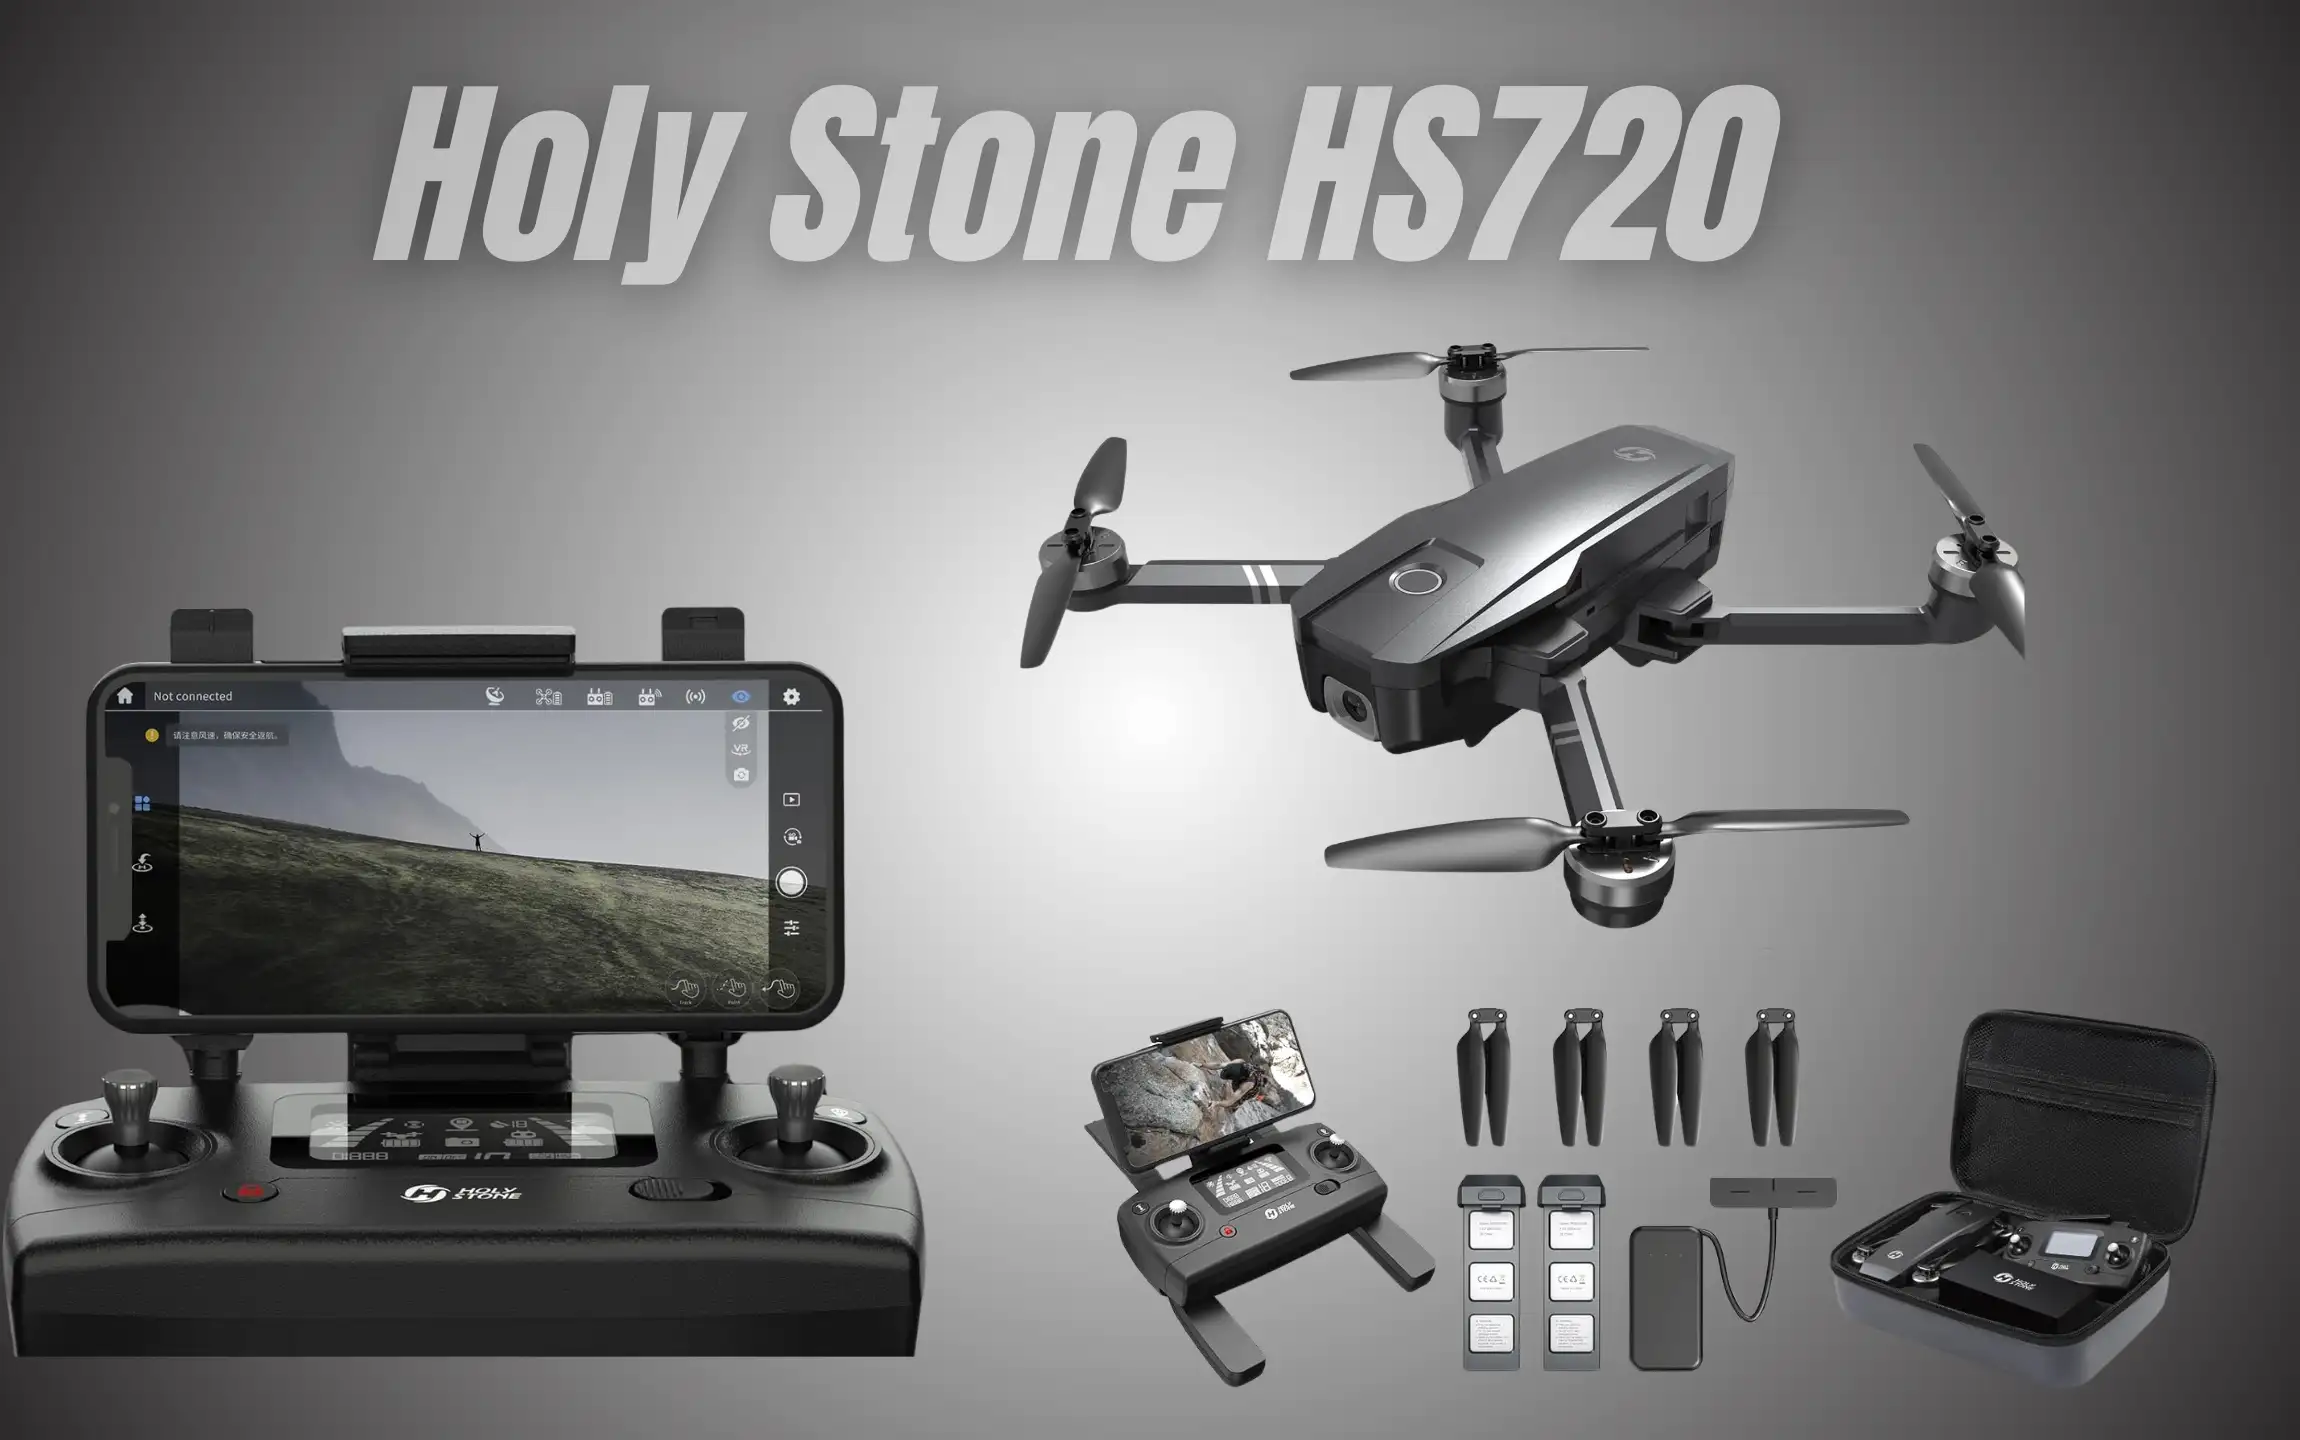 Holy Stone HS720 Controlled Drone for iPhone